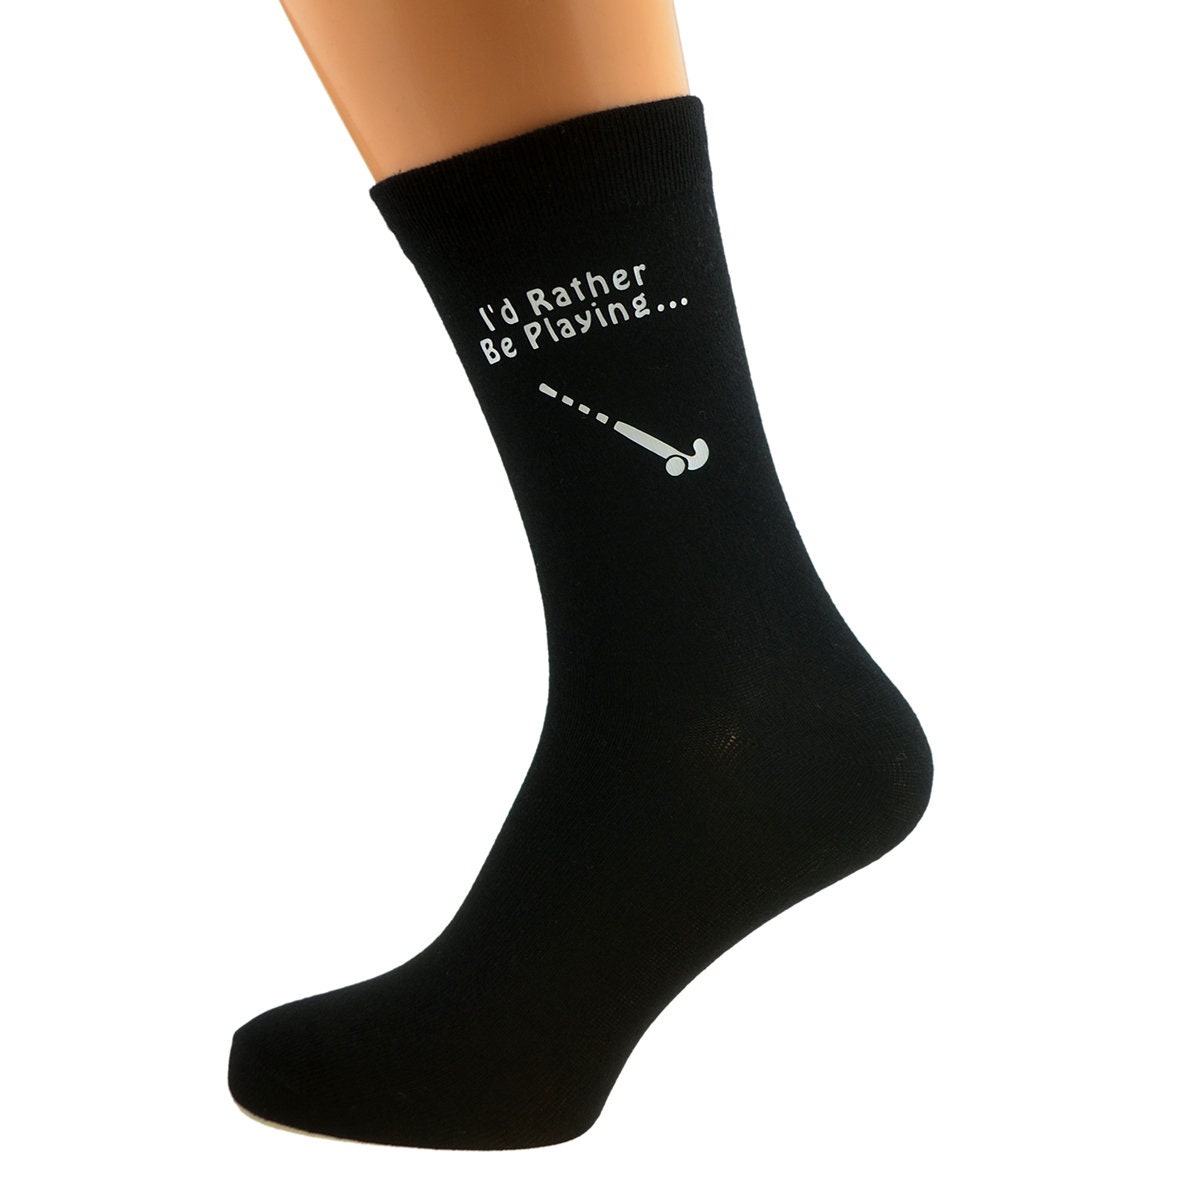 I’d Rather Be Playing Hockey With Stick Image Printed in White Vinyl On Mens Black Cotton Rich Socks Great. One Size, UK 8-12